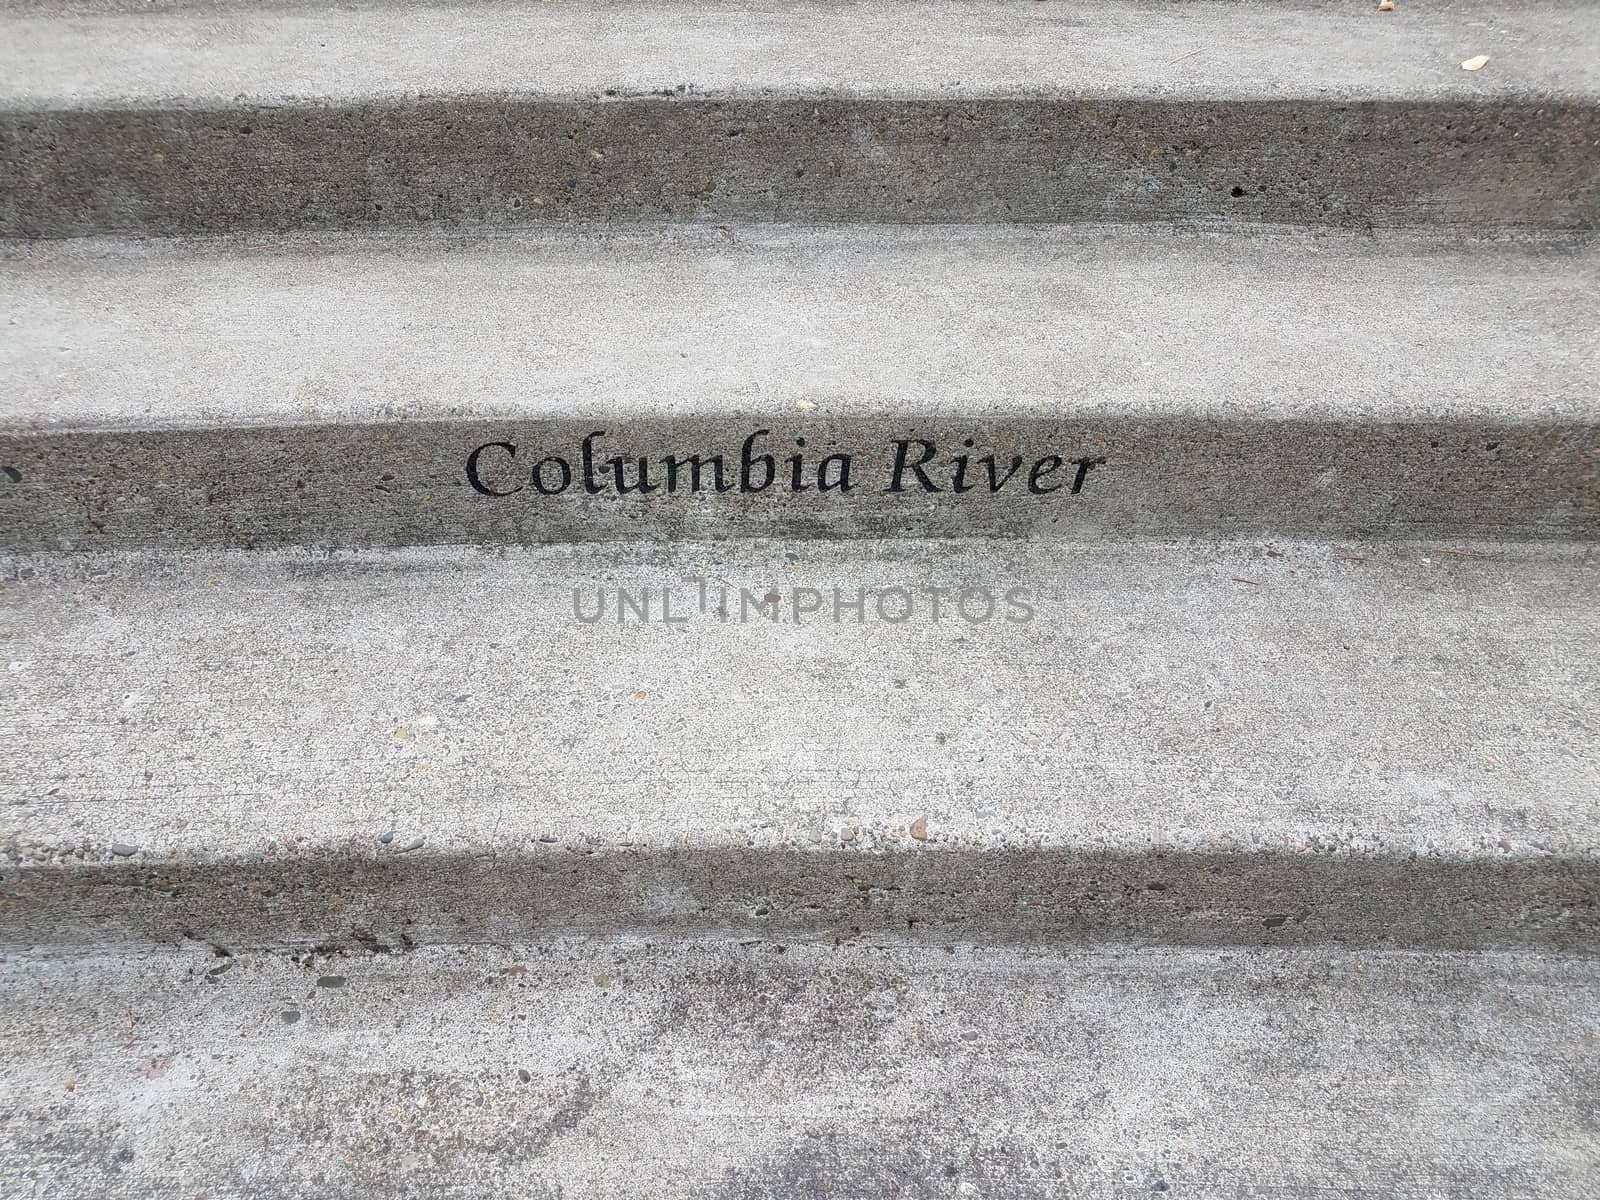 grey cement steps or stairs with Columbia River sign or letters